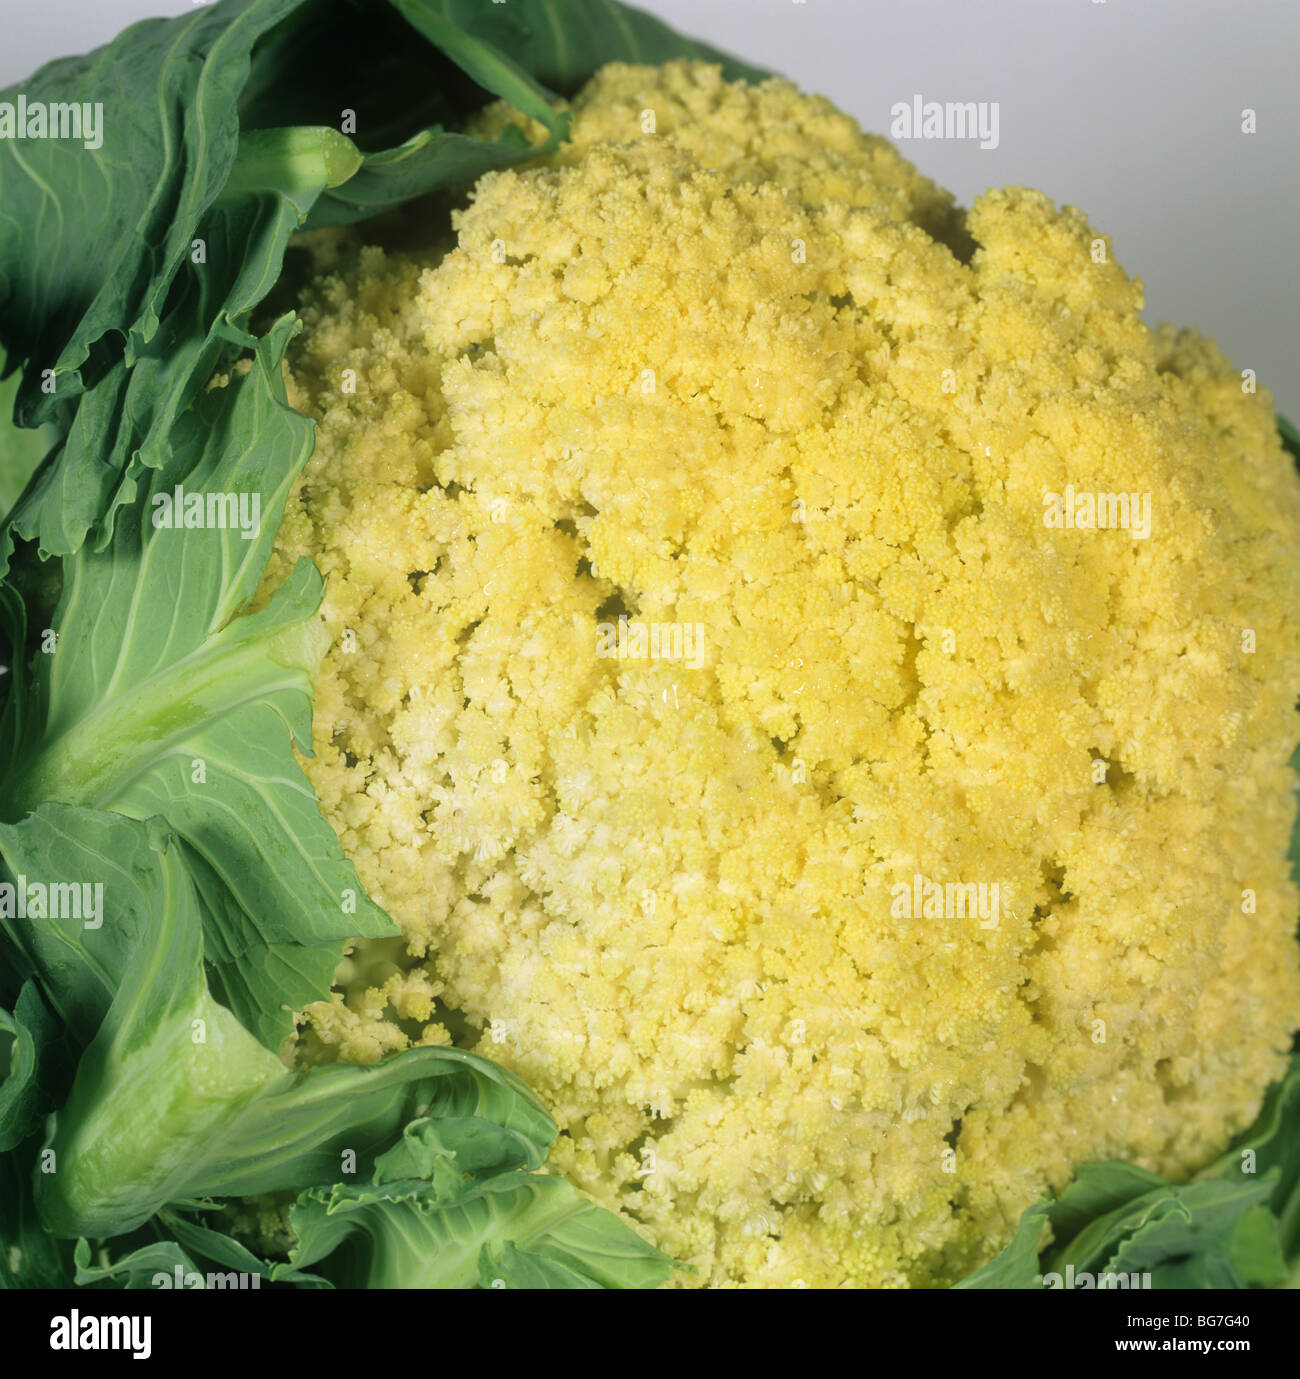 Curd defect with open florets on a harvested cauliflower head Stock Photo